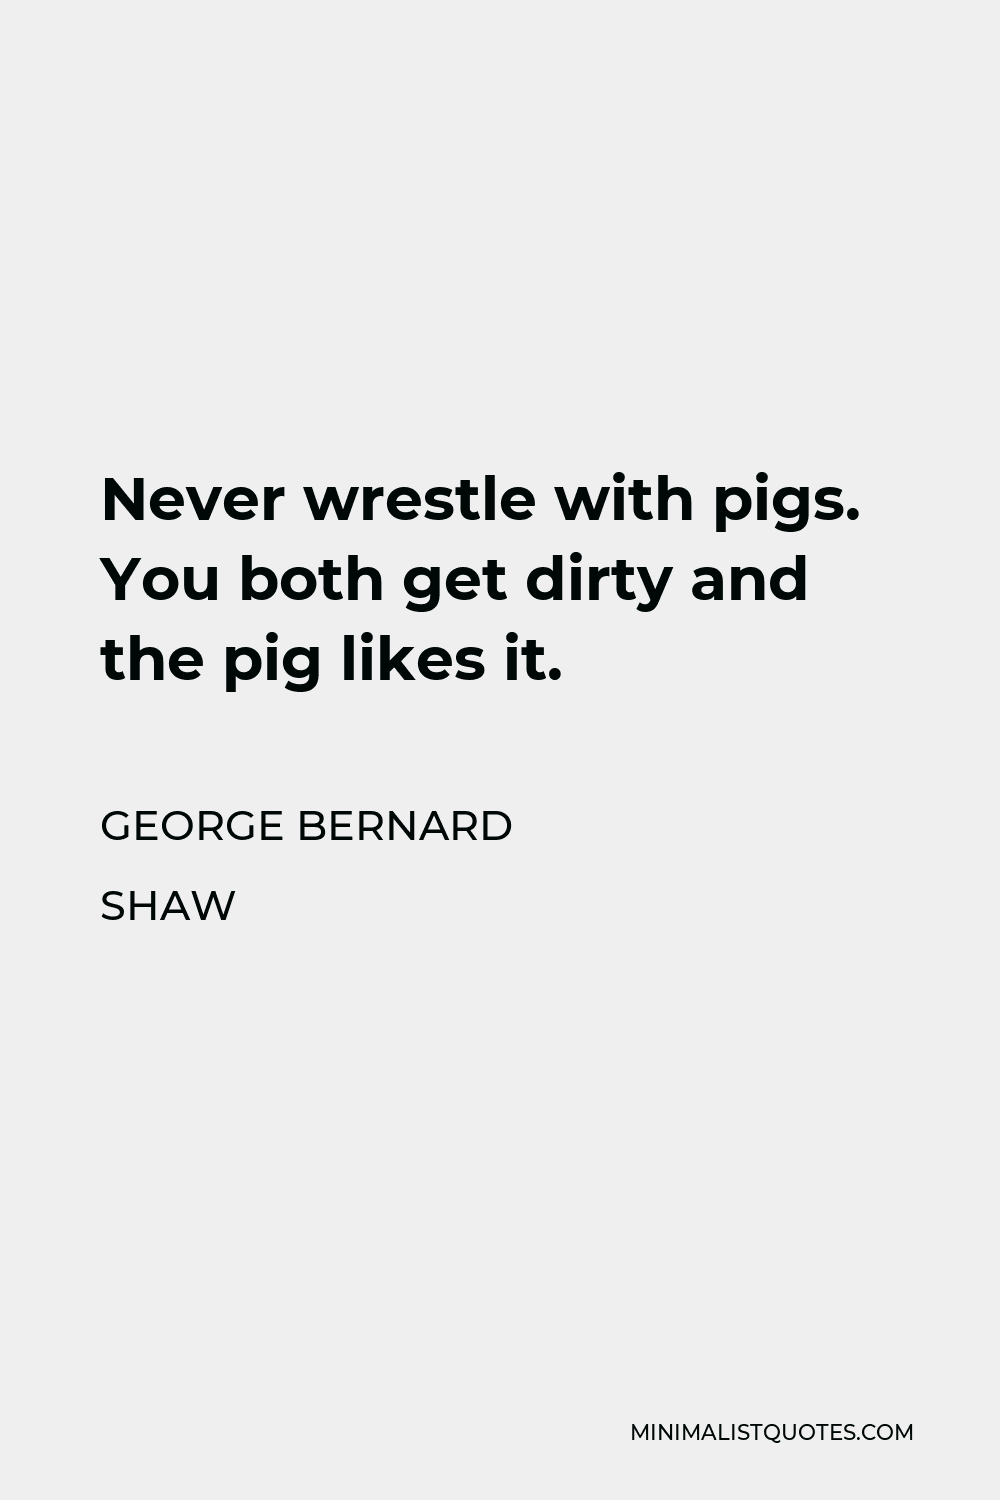 George Bernard Shaw Quote - Never wrestle with pigs. You both get dirty and the pig likes it.